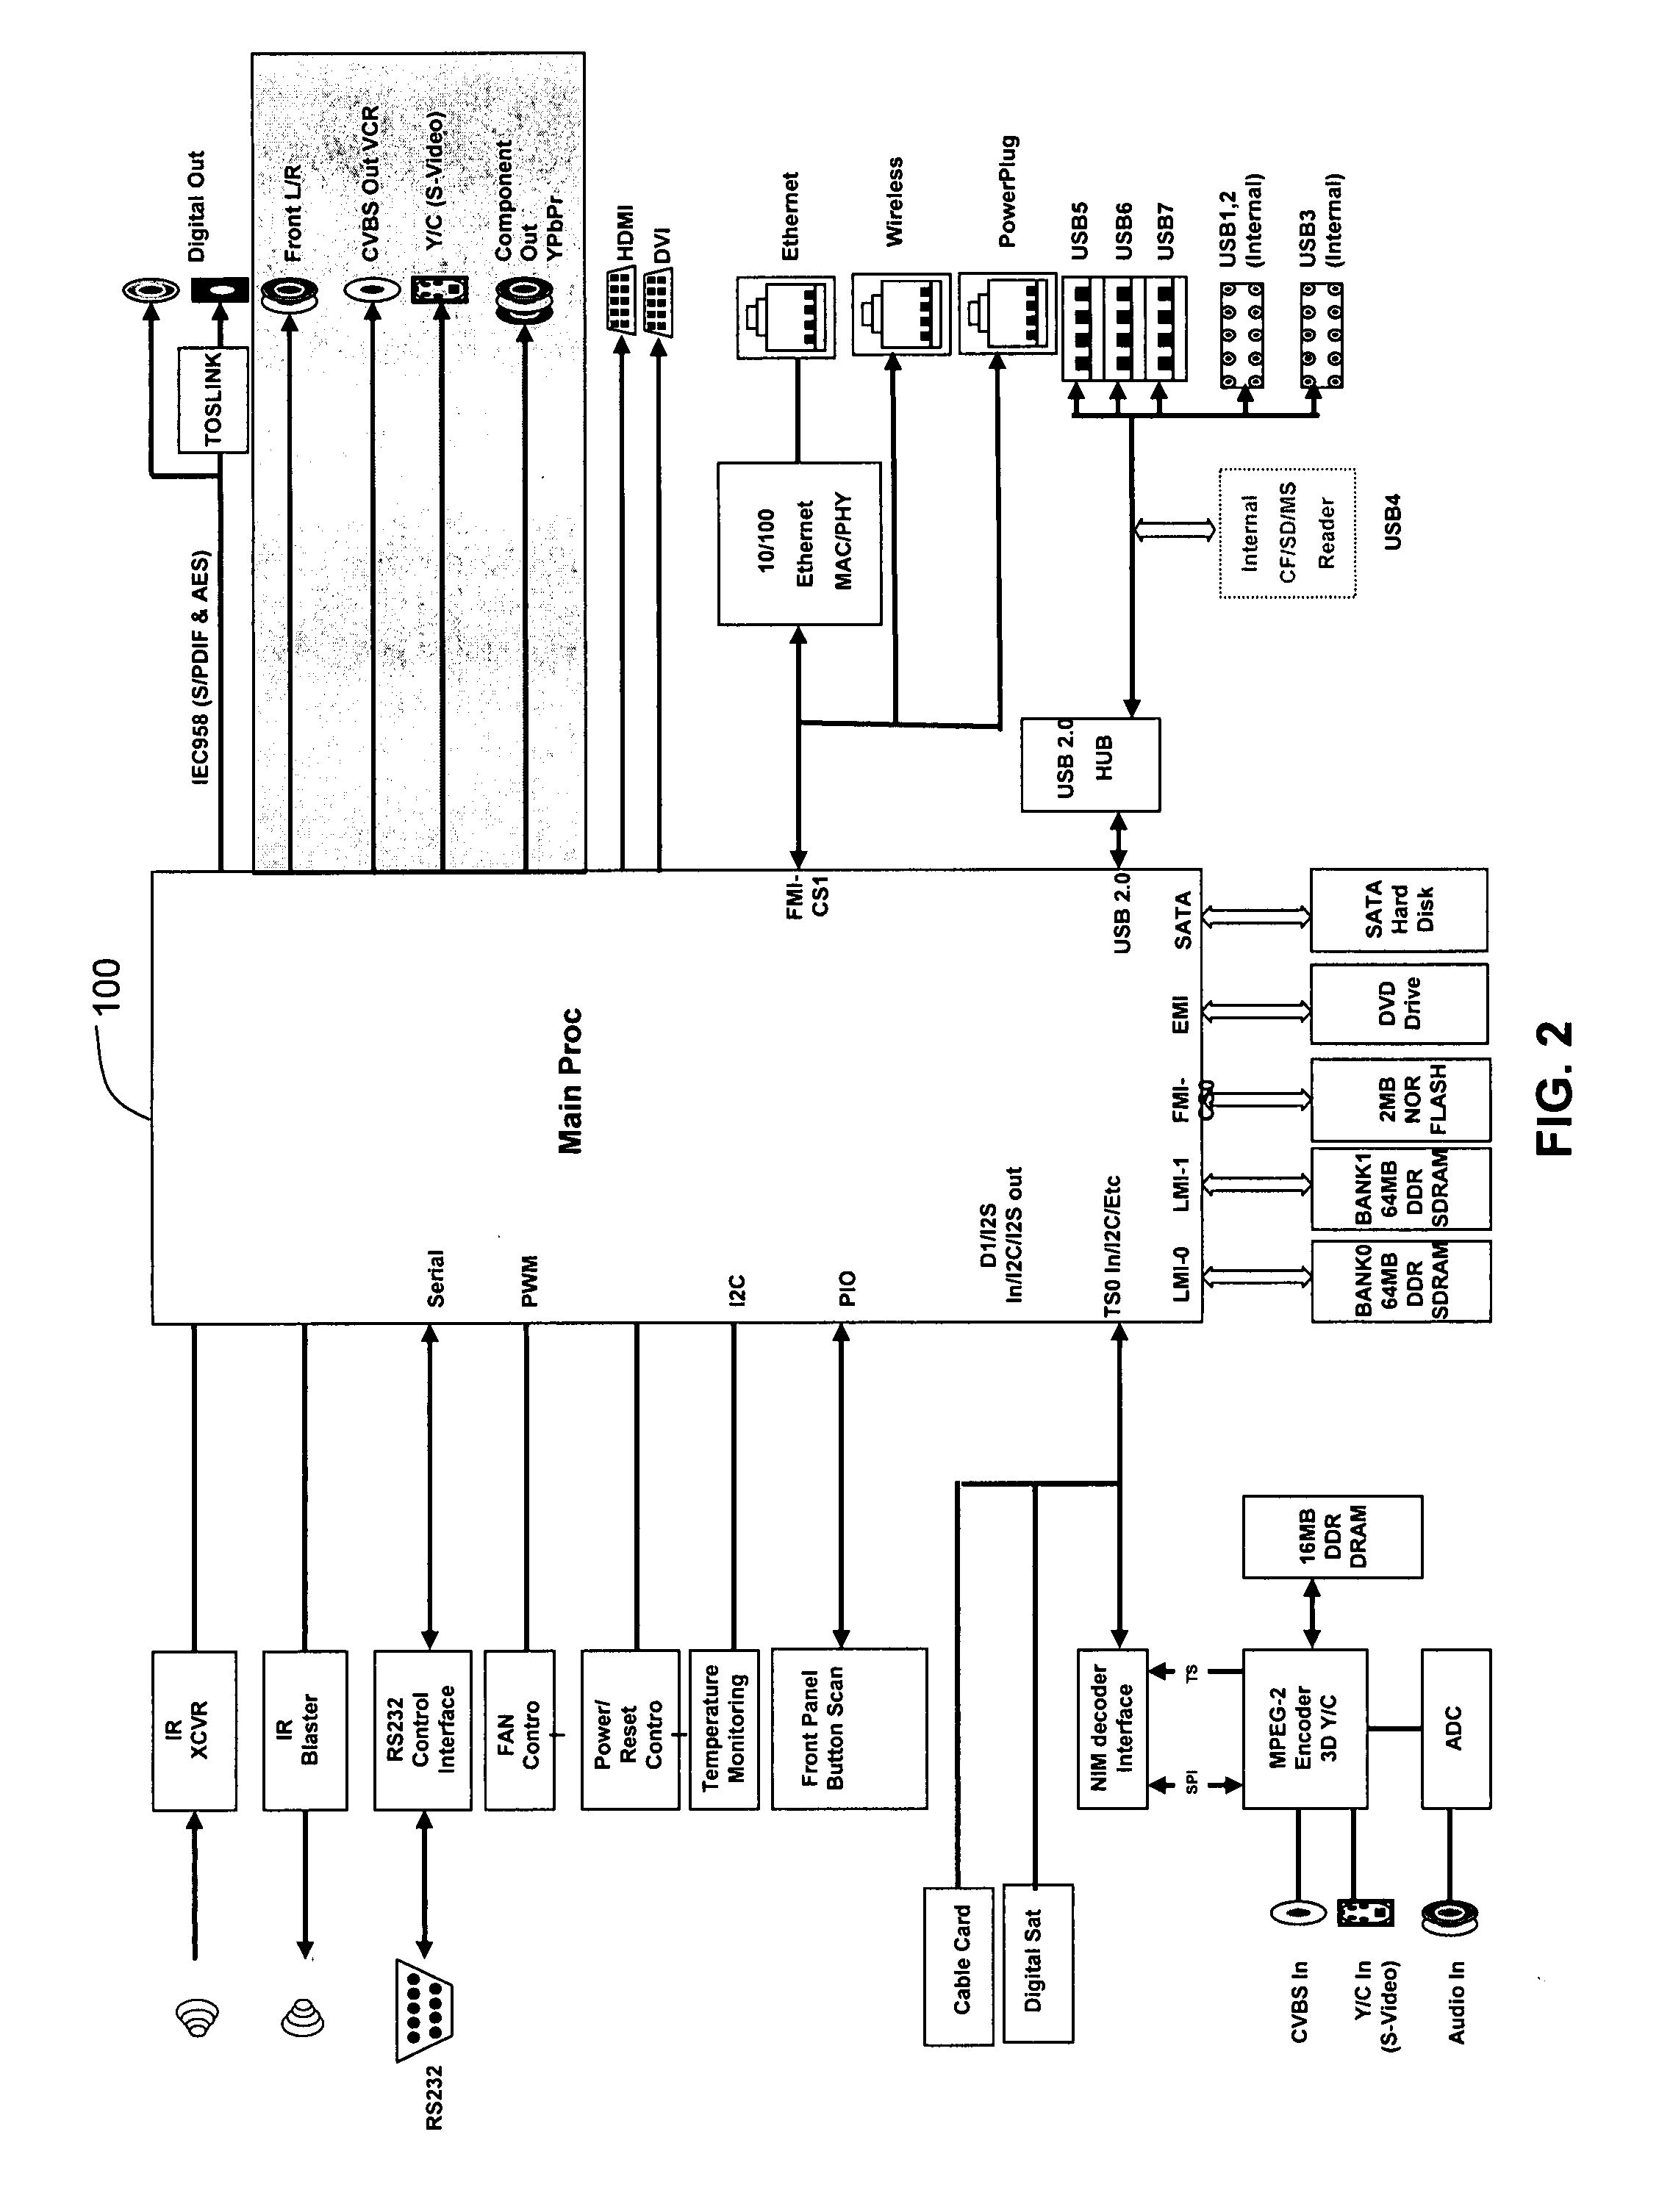 Digital content delivery via virtual private network (VPN) incorporating secured set-top devices